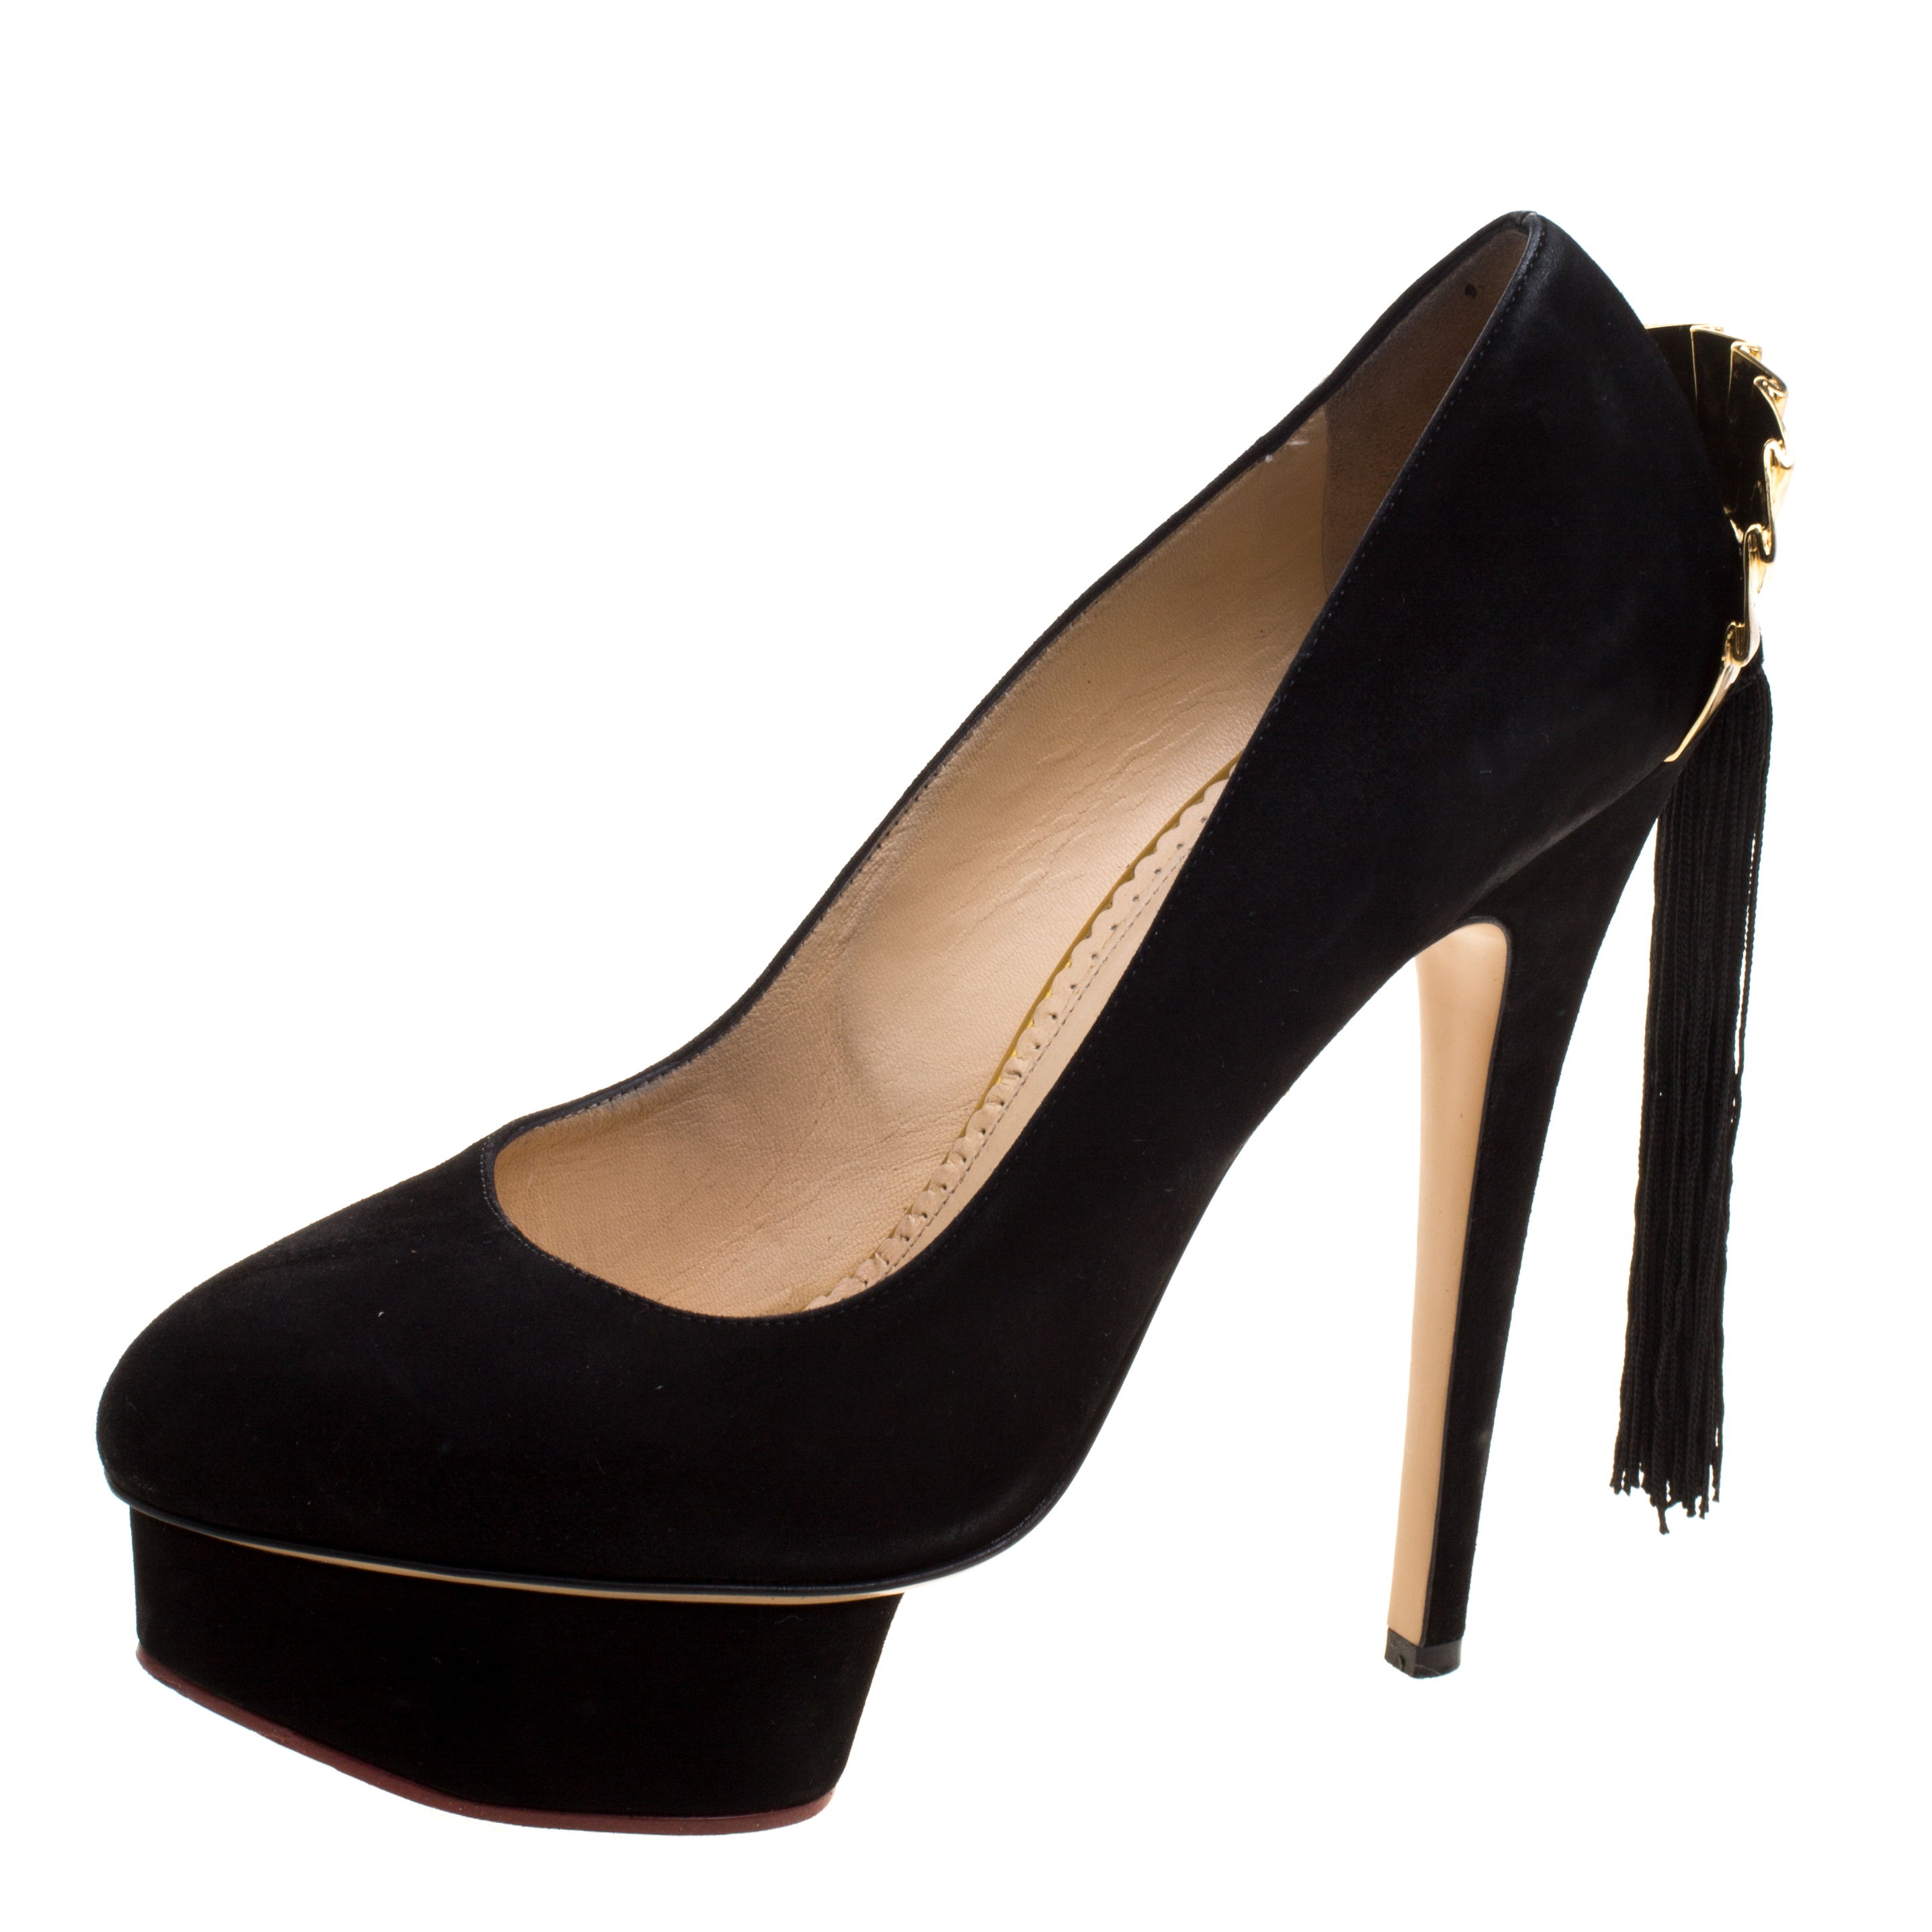 Charlotte Olympia Black Suede Fantastic Dolly Tassel Pumps Size 39.5